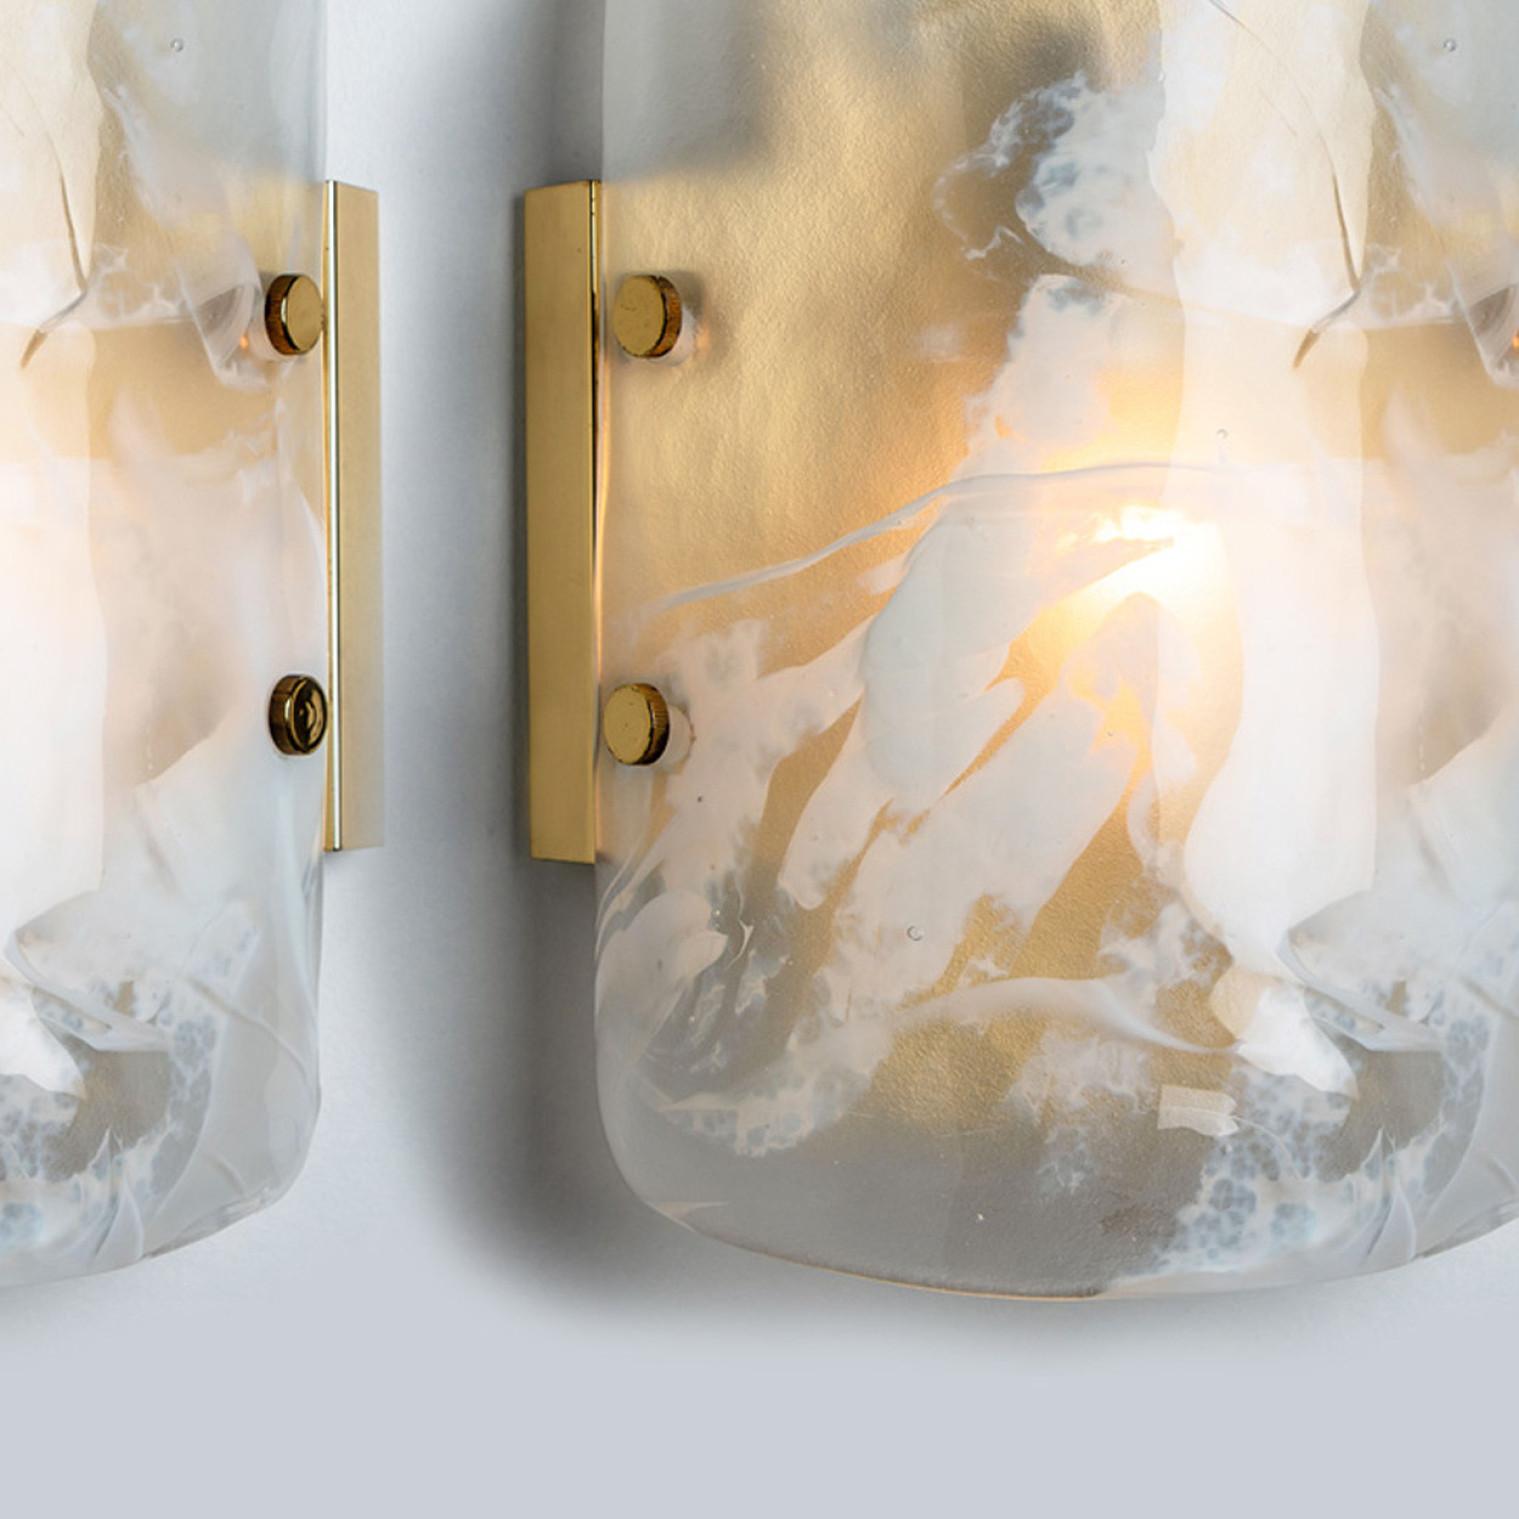 Hillebrand Marble Murano Glass Wall Light Fixtures, 1960s For Sale 1